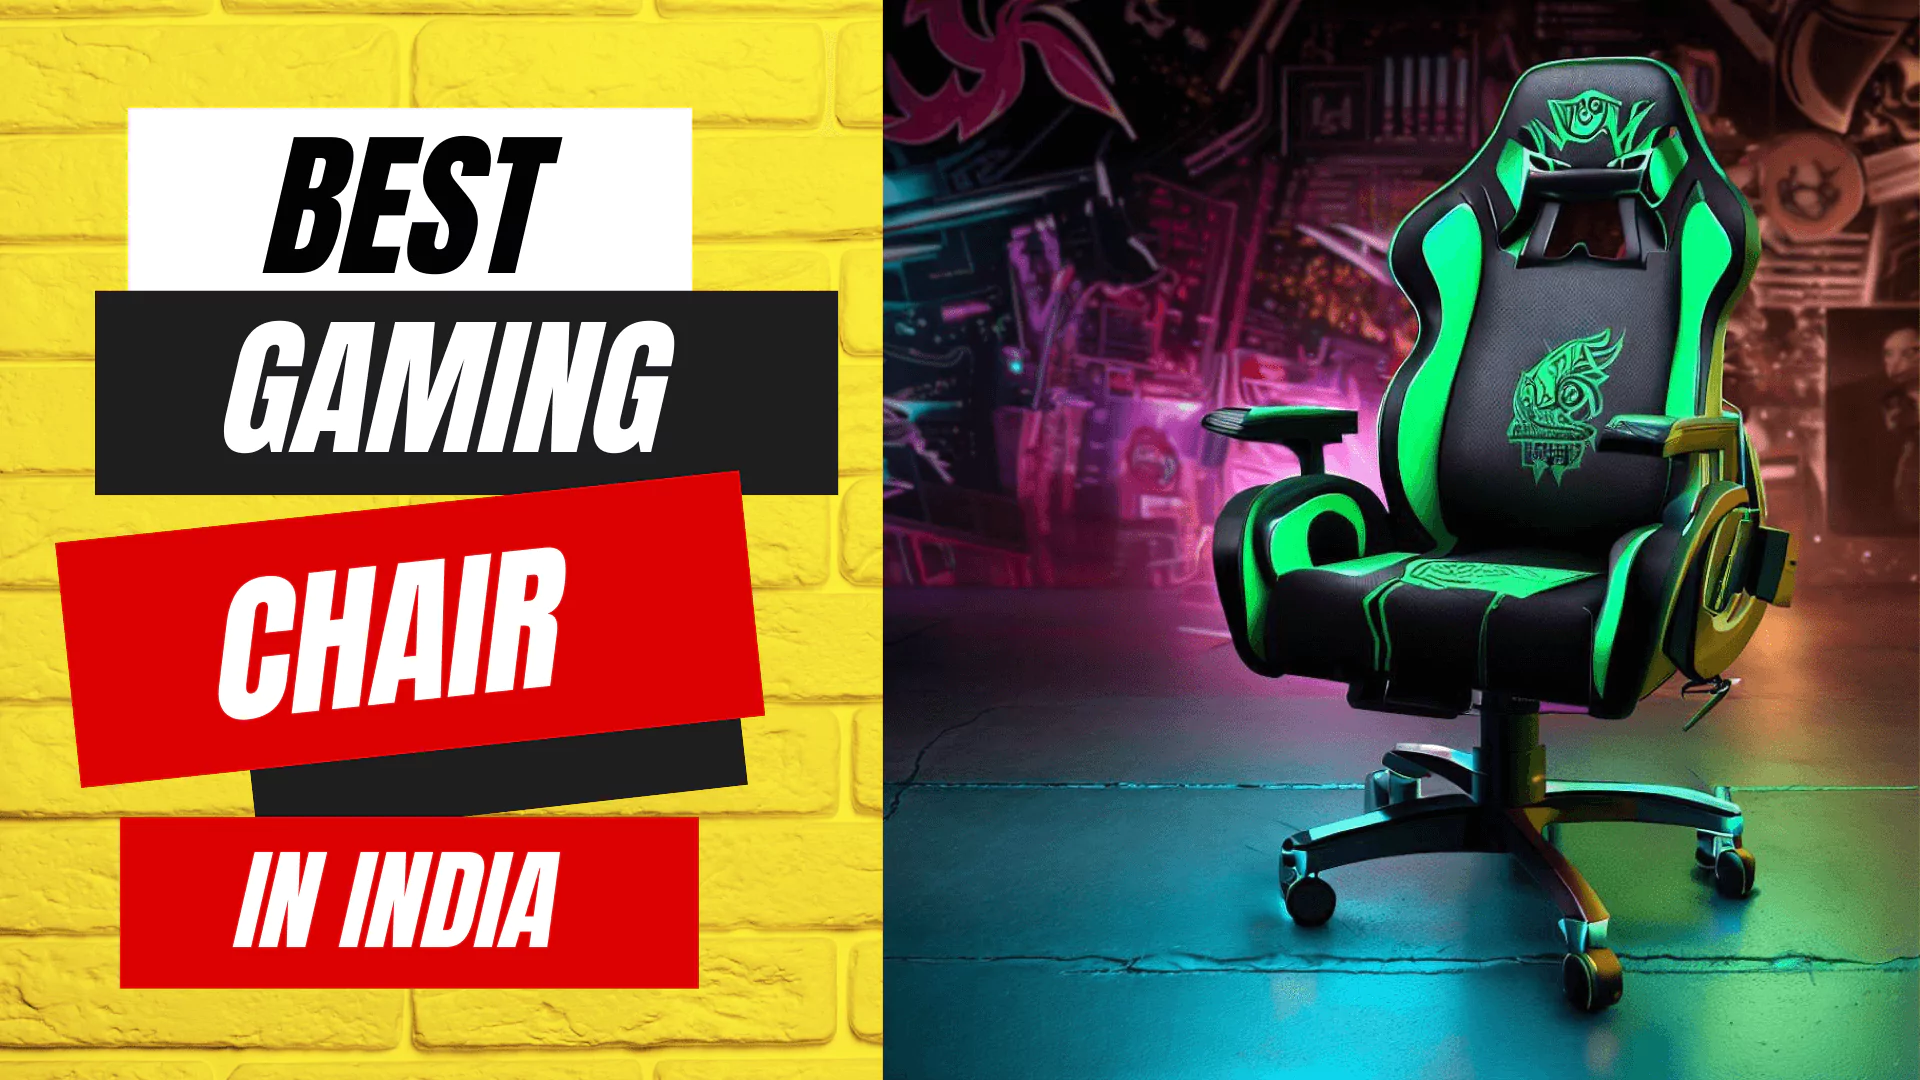 Best Gaming Chair in India